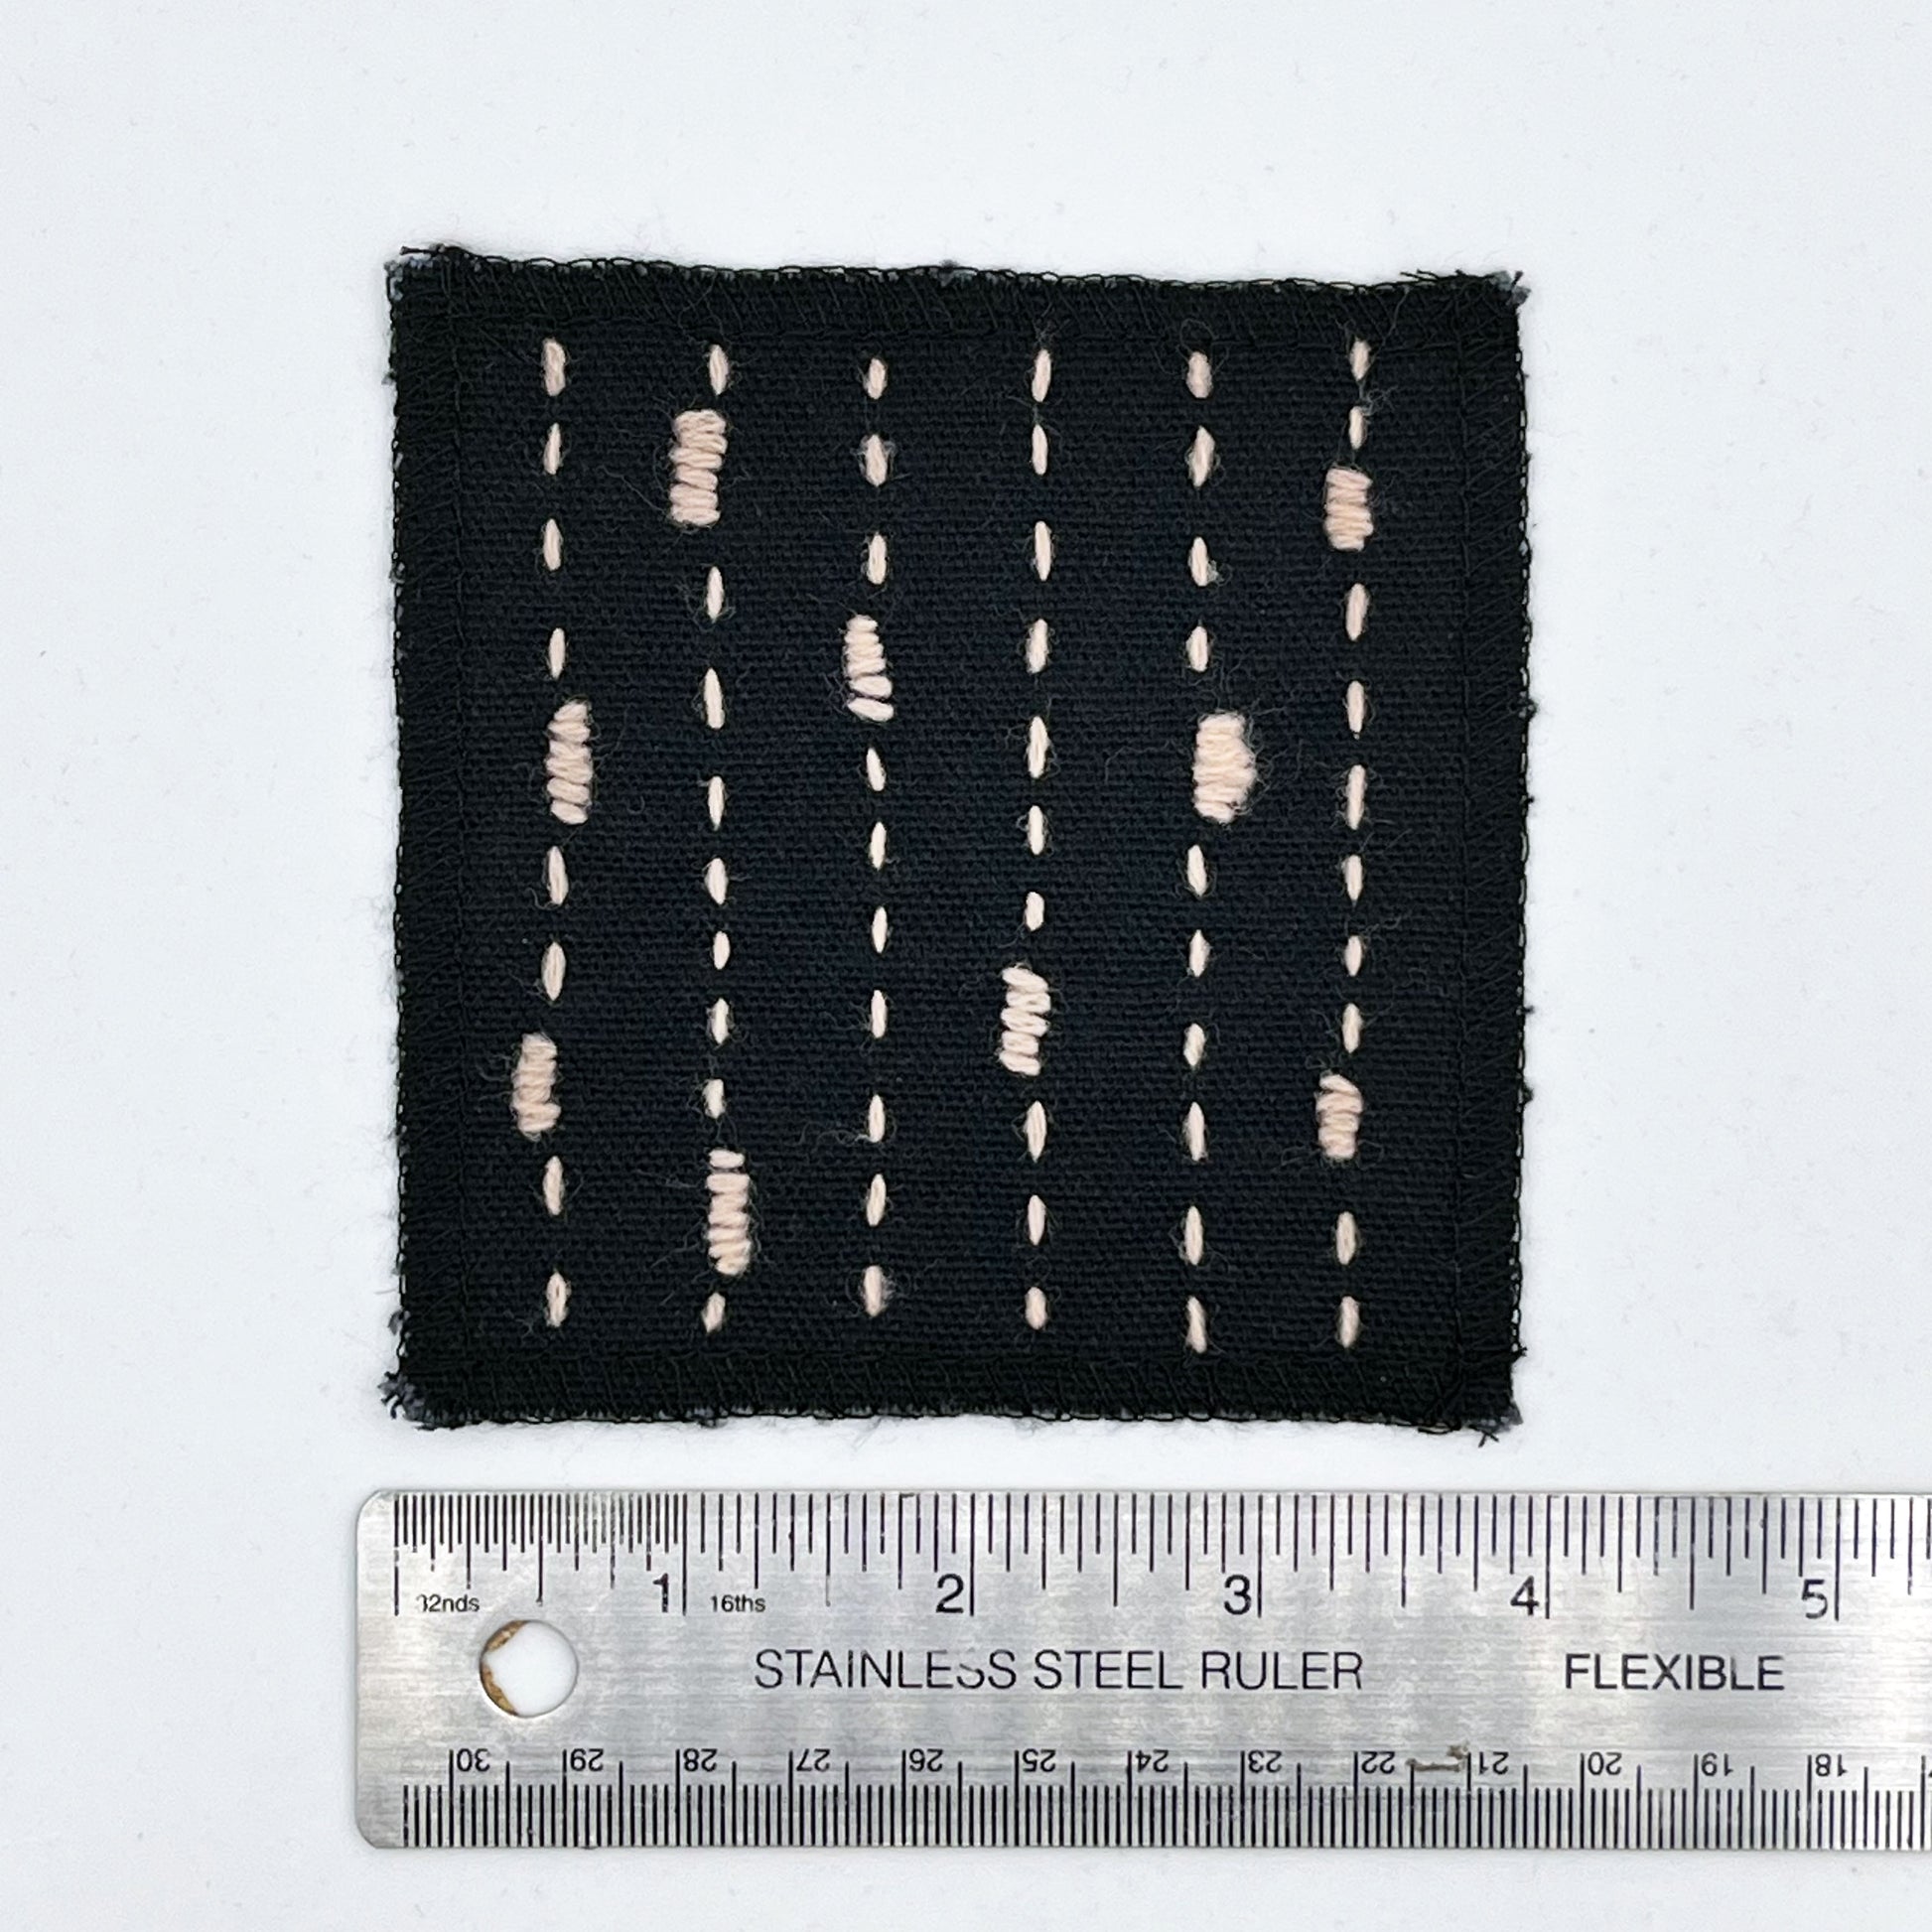 a square patch made out of black canvas, handstitched with peach running stitches with randomly placed small rectangles made of stitches running the other direction, with overlocked edges, on a white background next to a ruler to show width of 4 in